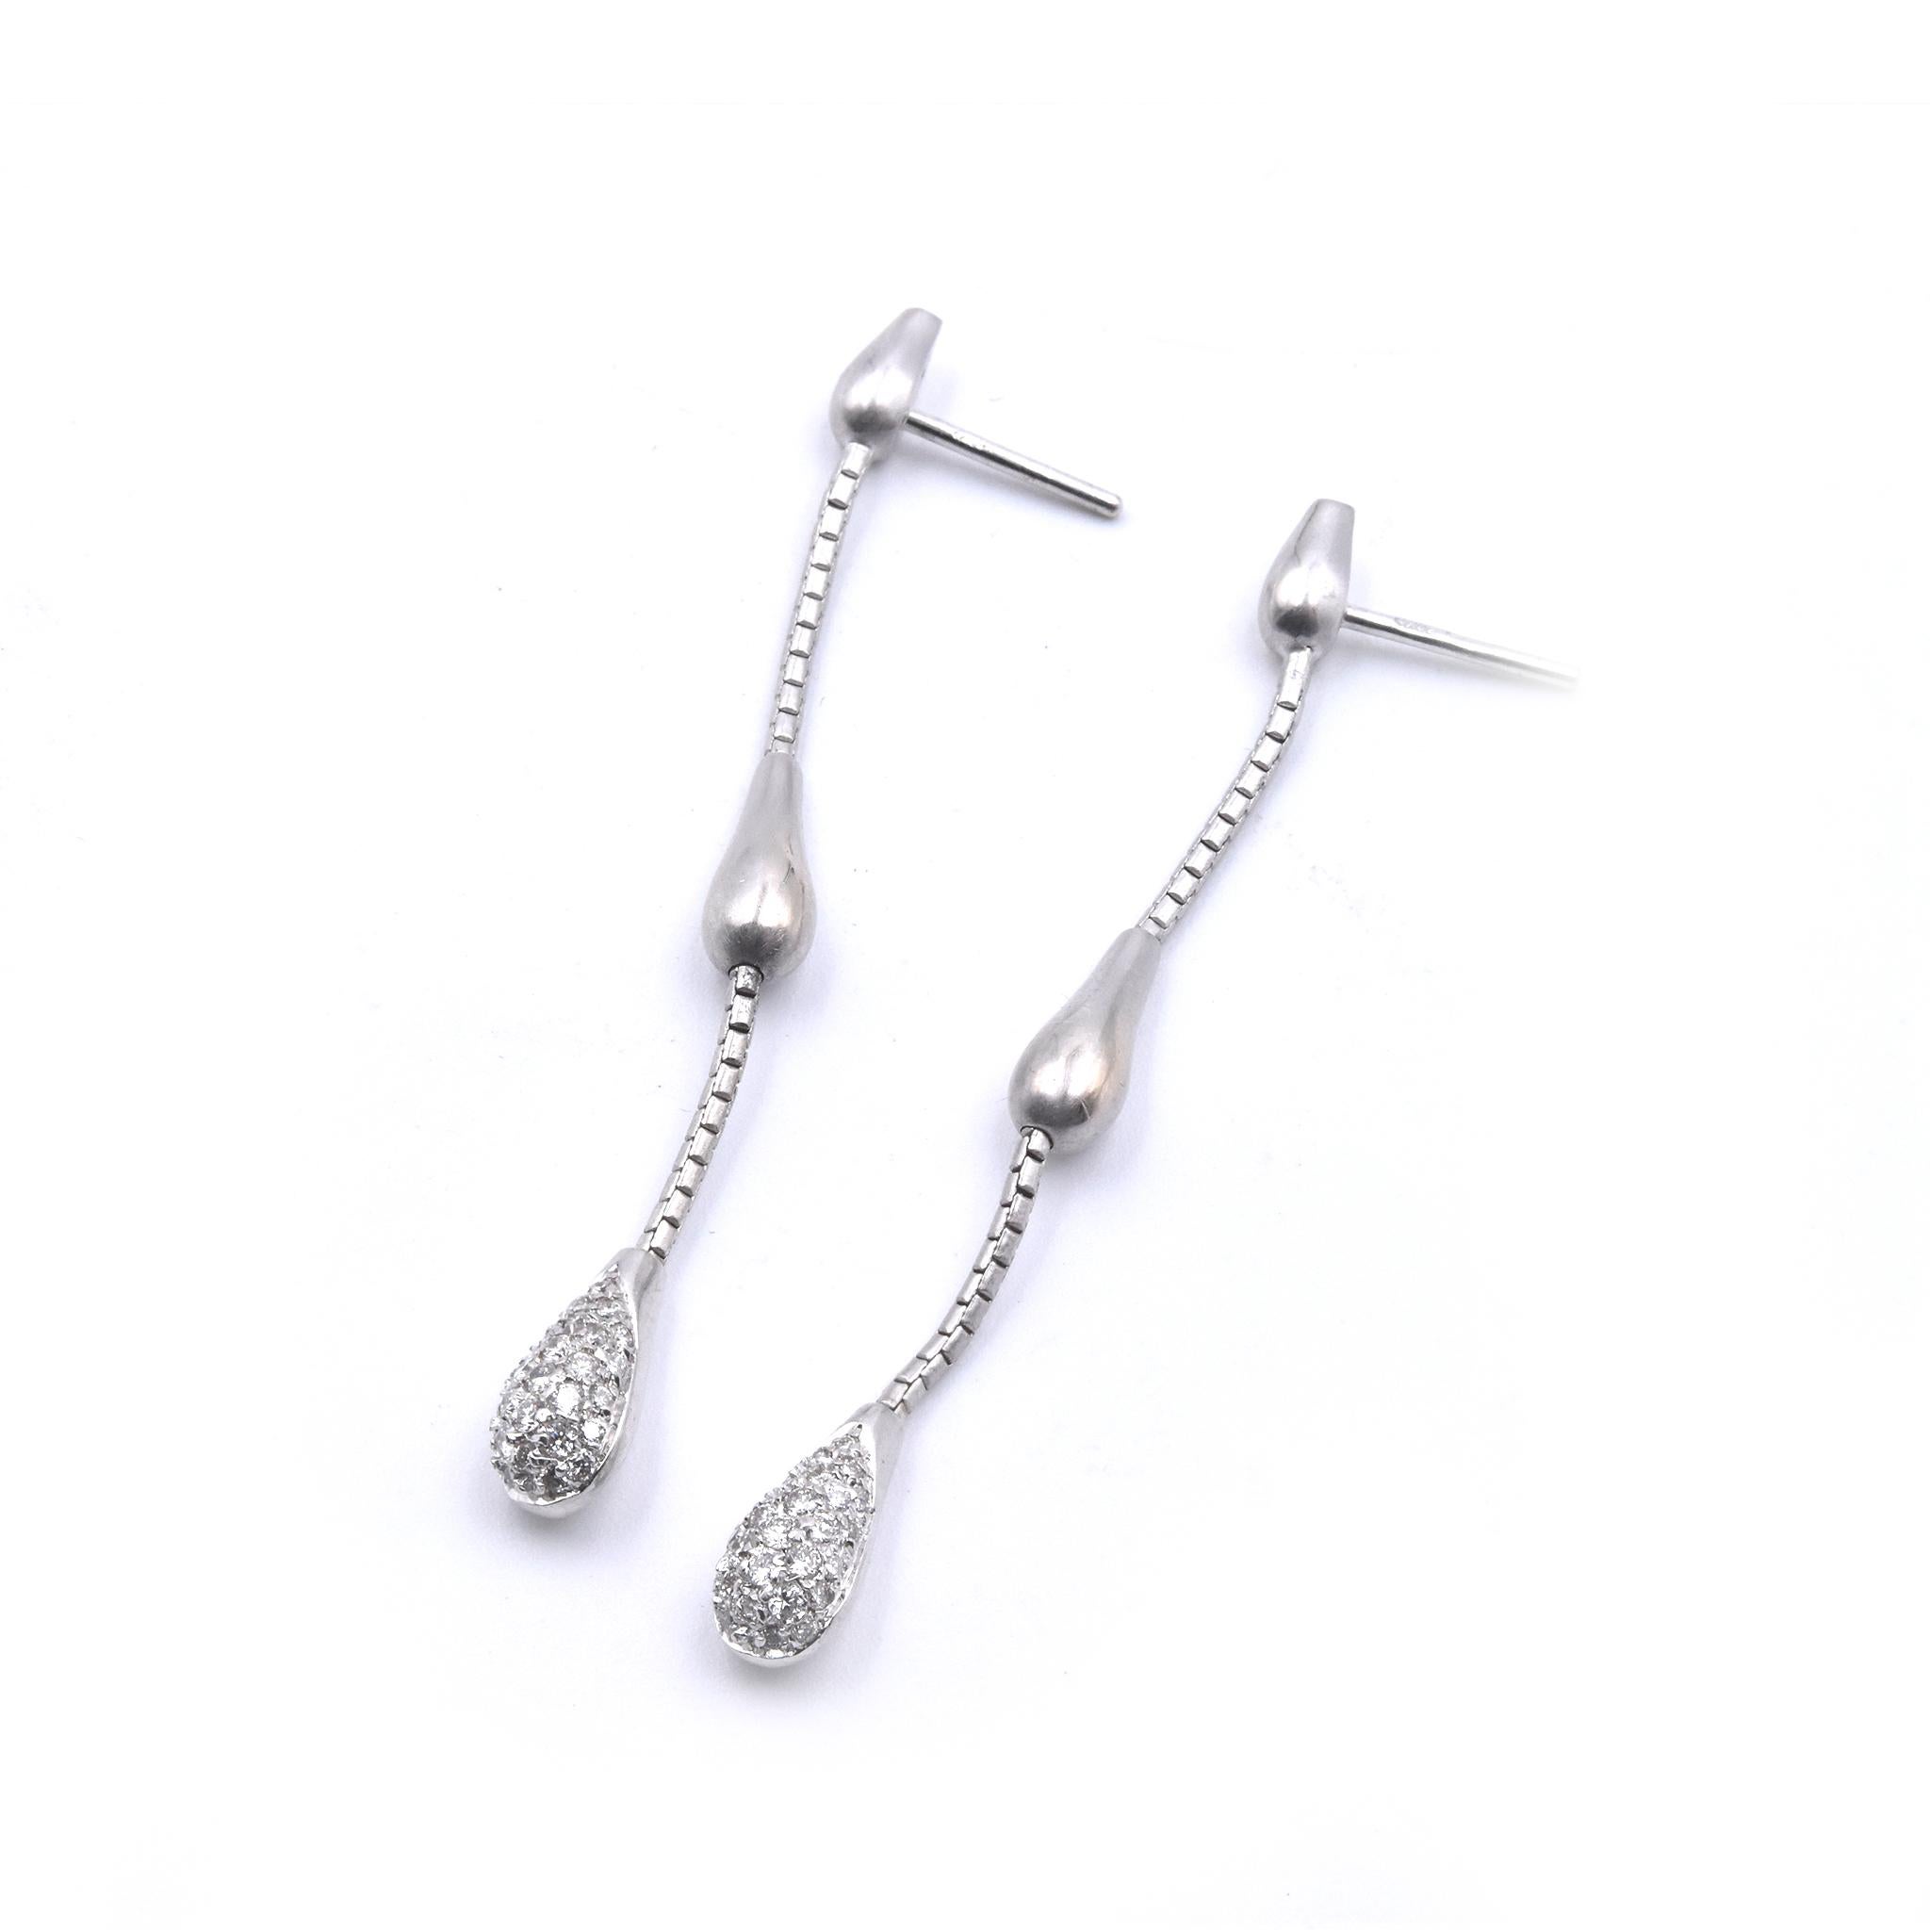 Designer: custom
Material: 18k white gold
Diamonds: 44 round brilliant cuts = 0.44cttw
Color: G 
Clarity: VS
Dimensions: earrings measure 53.5mm x 5.06mm
Fastenings: posts with friction backs 
Weight: 8.27 grams
